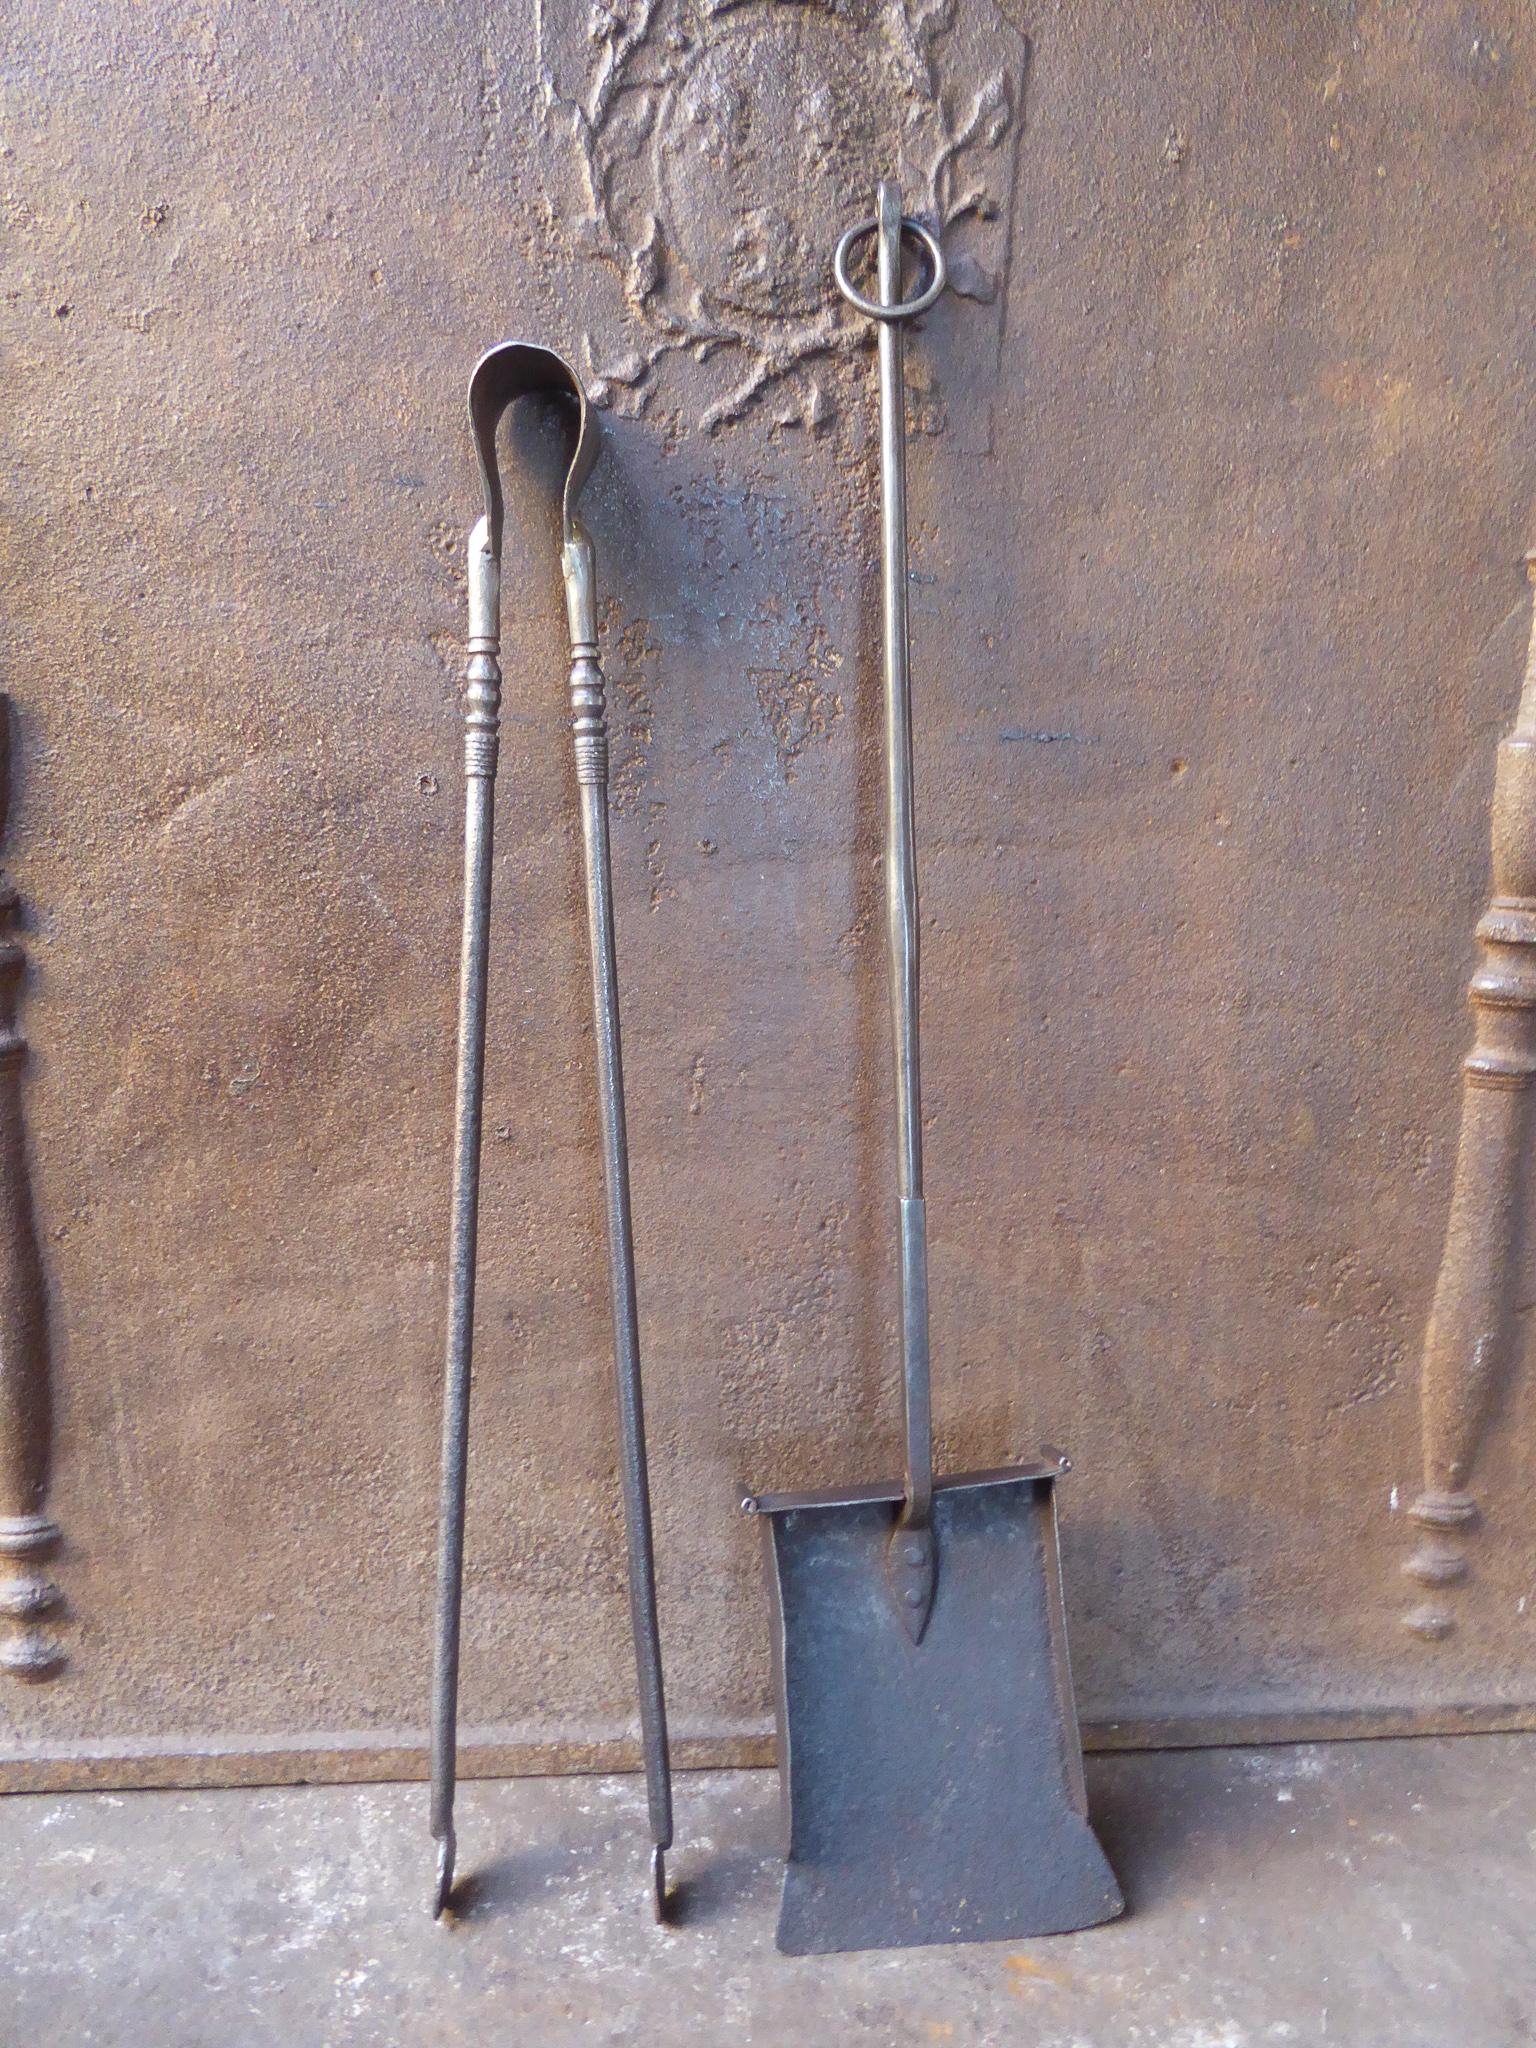 17th-18th century French Louis XIV fireplace tool set. The fire irons are made of wrought iron. They are in a good condition and fully functional.